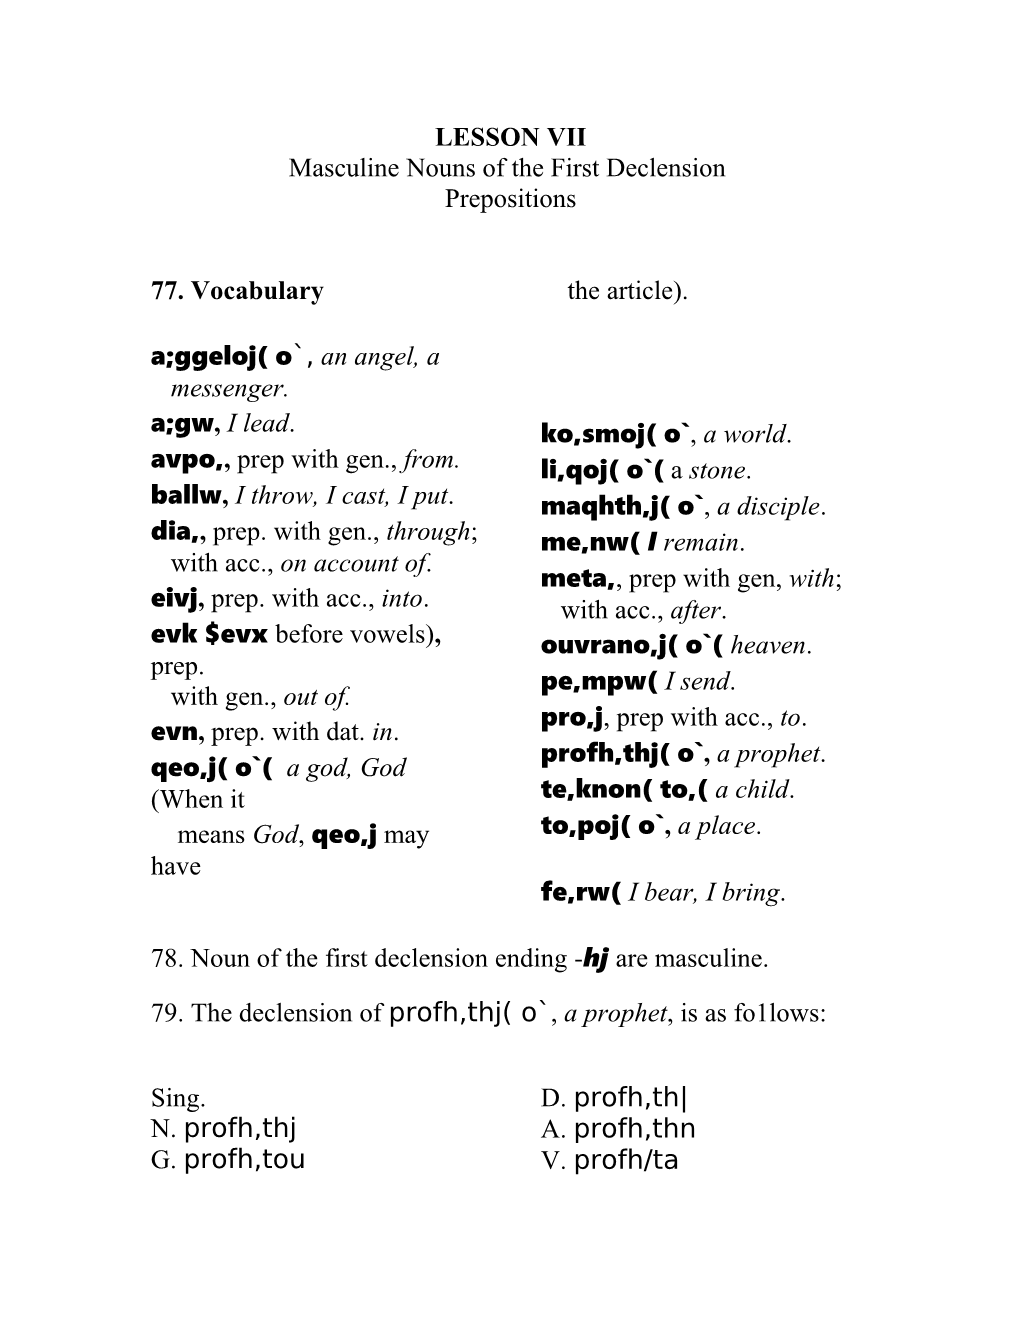 Masculine Nouns of the First Declension